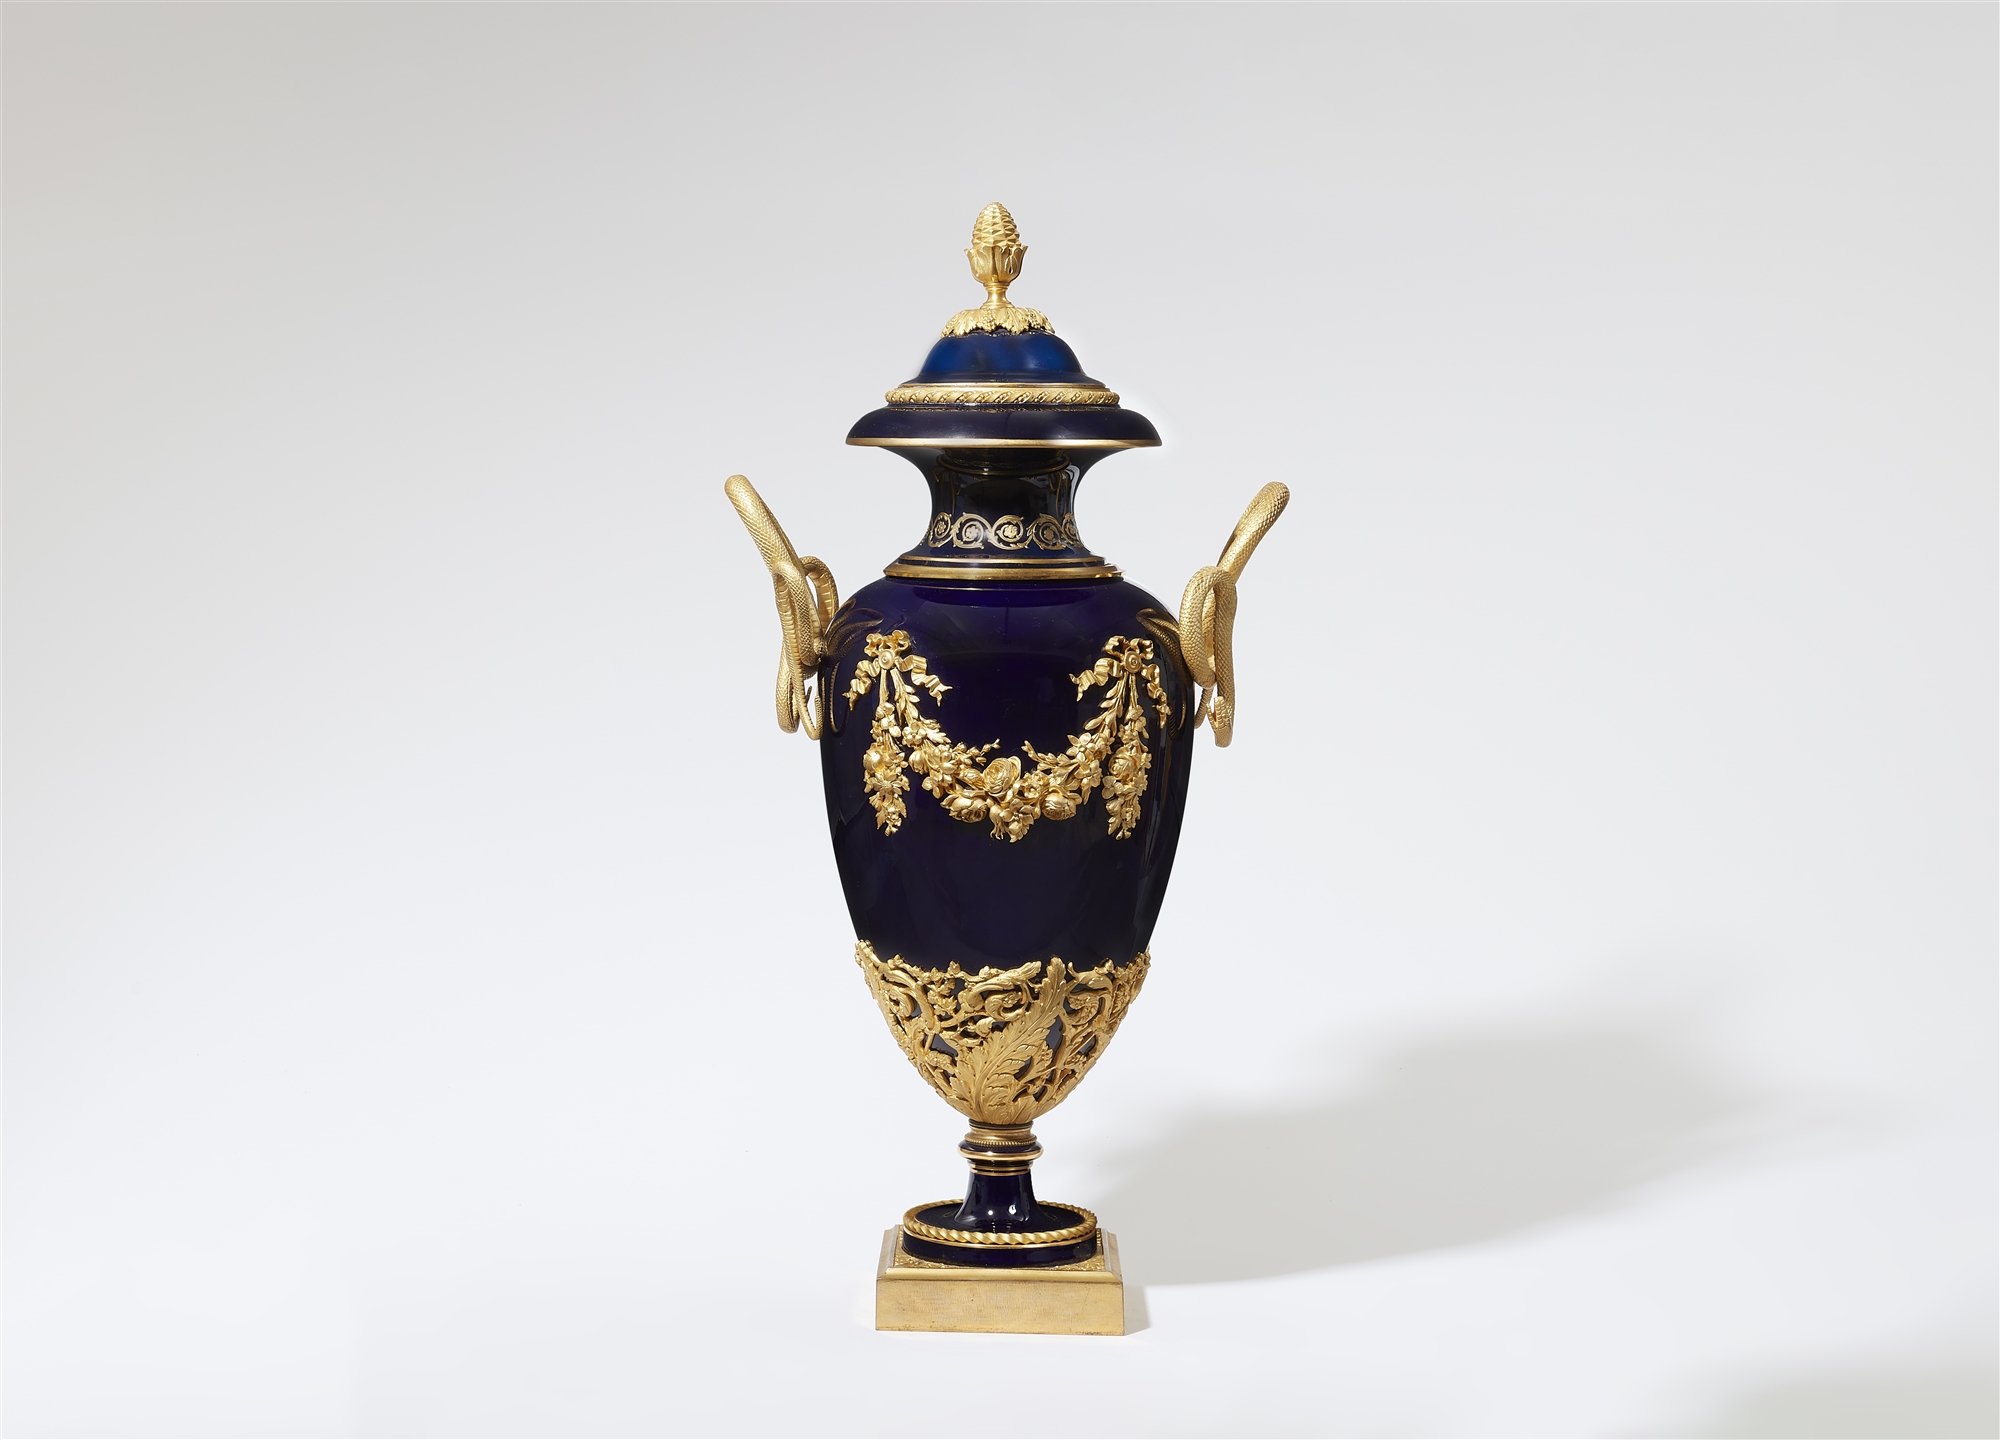 A magnificent heraldic porcelain vase in the manner of Sèvres